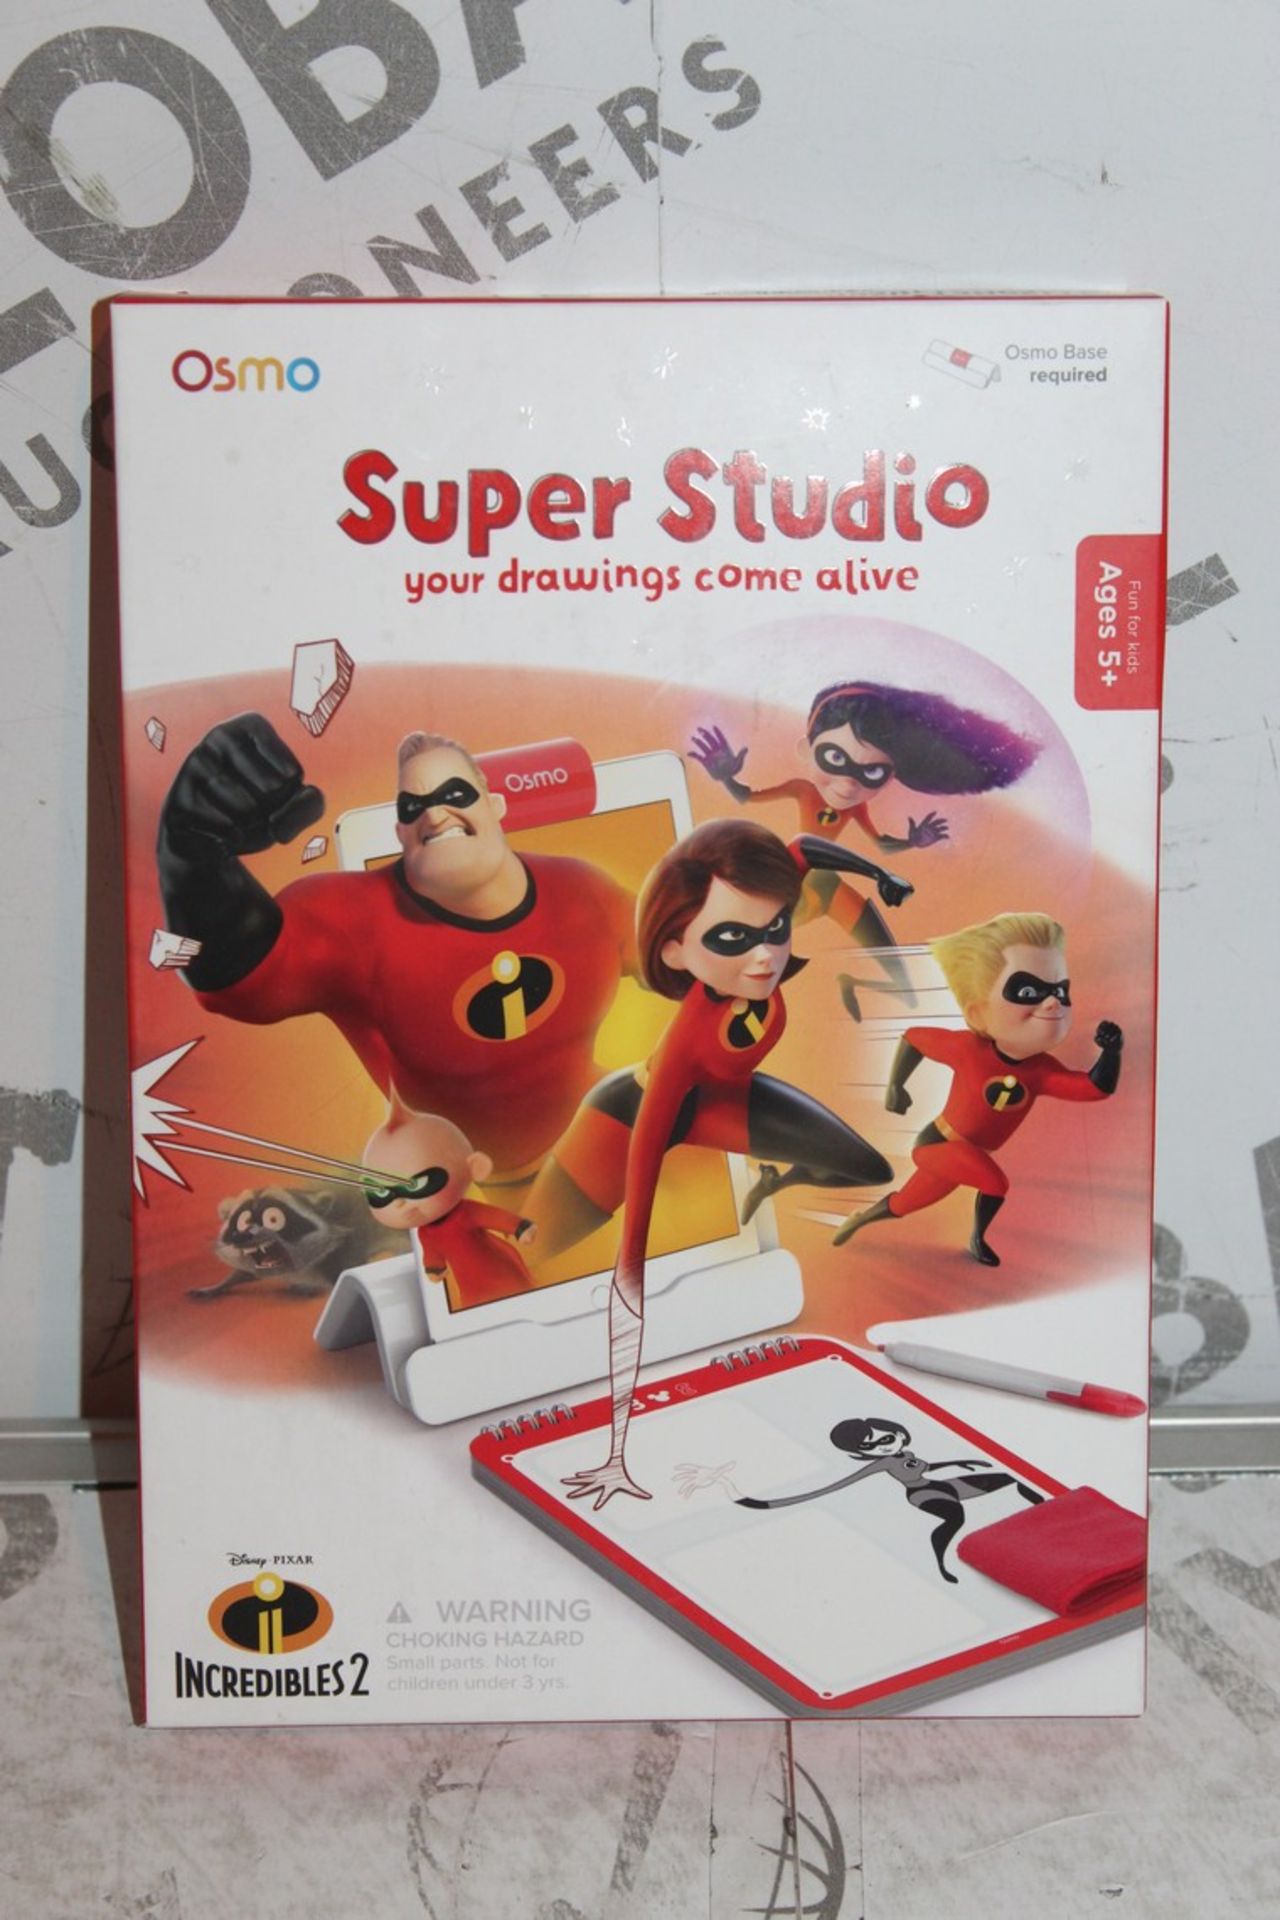 One Lot to Contain, 5 Osmo Super Studio, Drawings Come To Life, Interactive Disney Incredibles